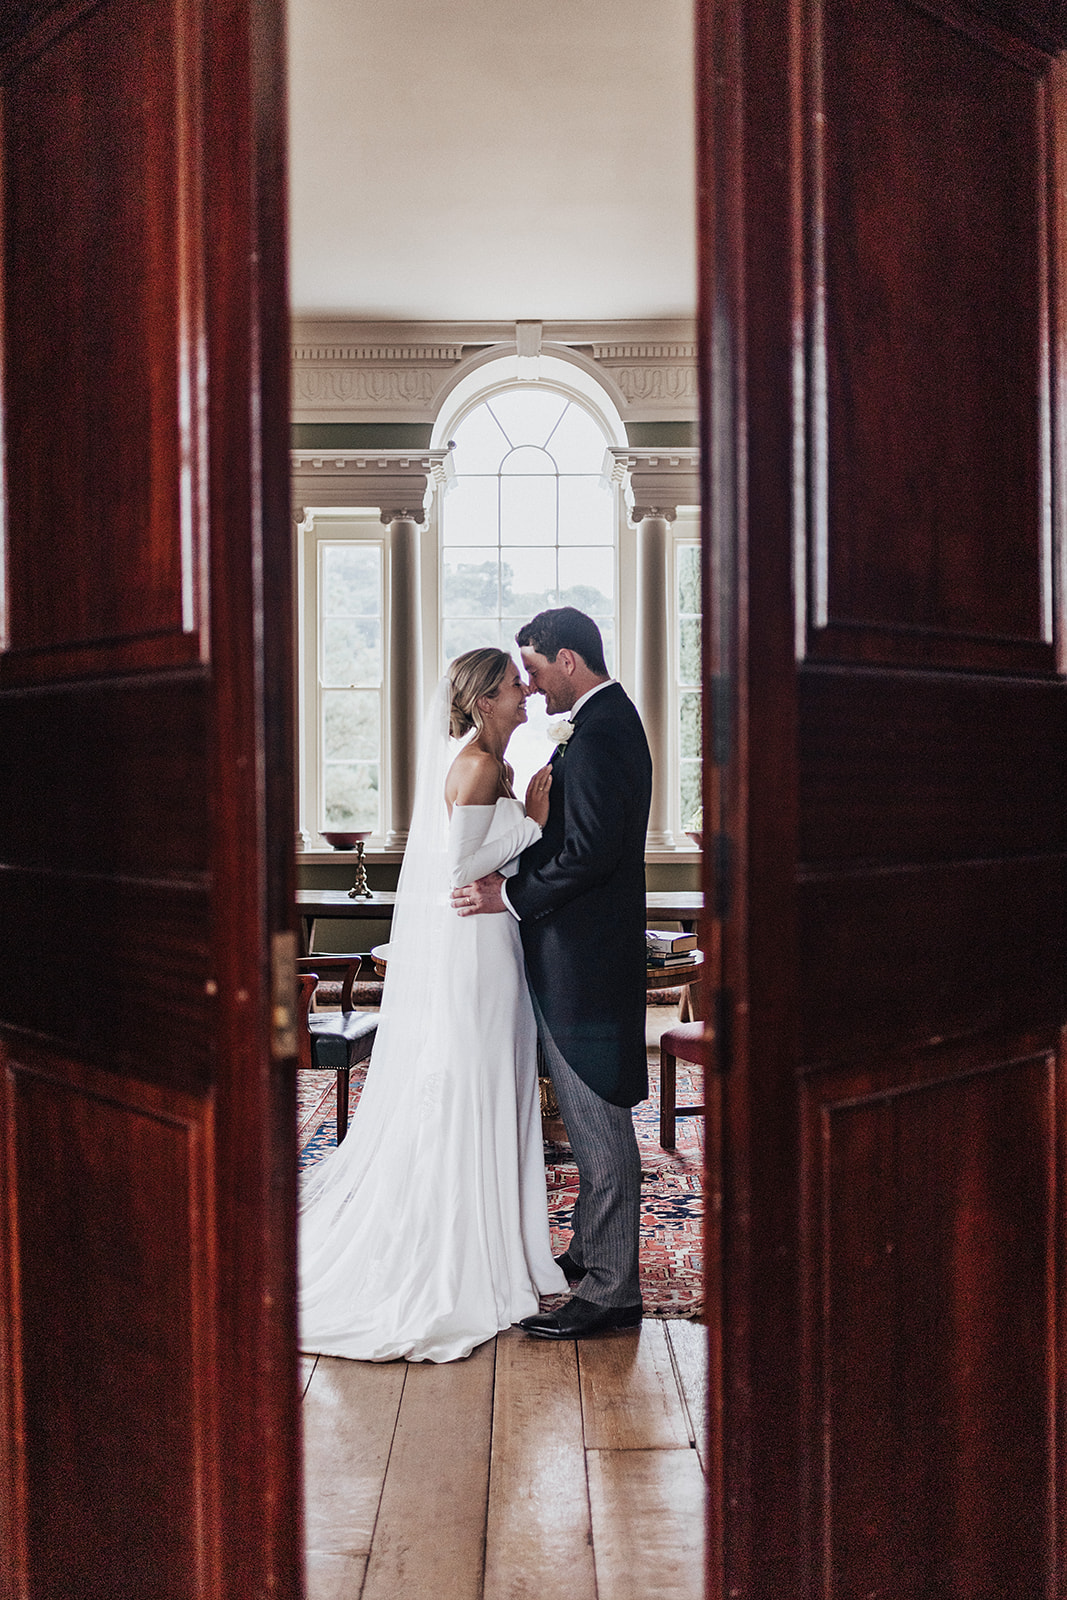 A couples who got married in a modern and stylish editorial wedding in cornwall